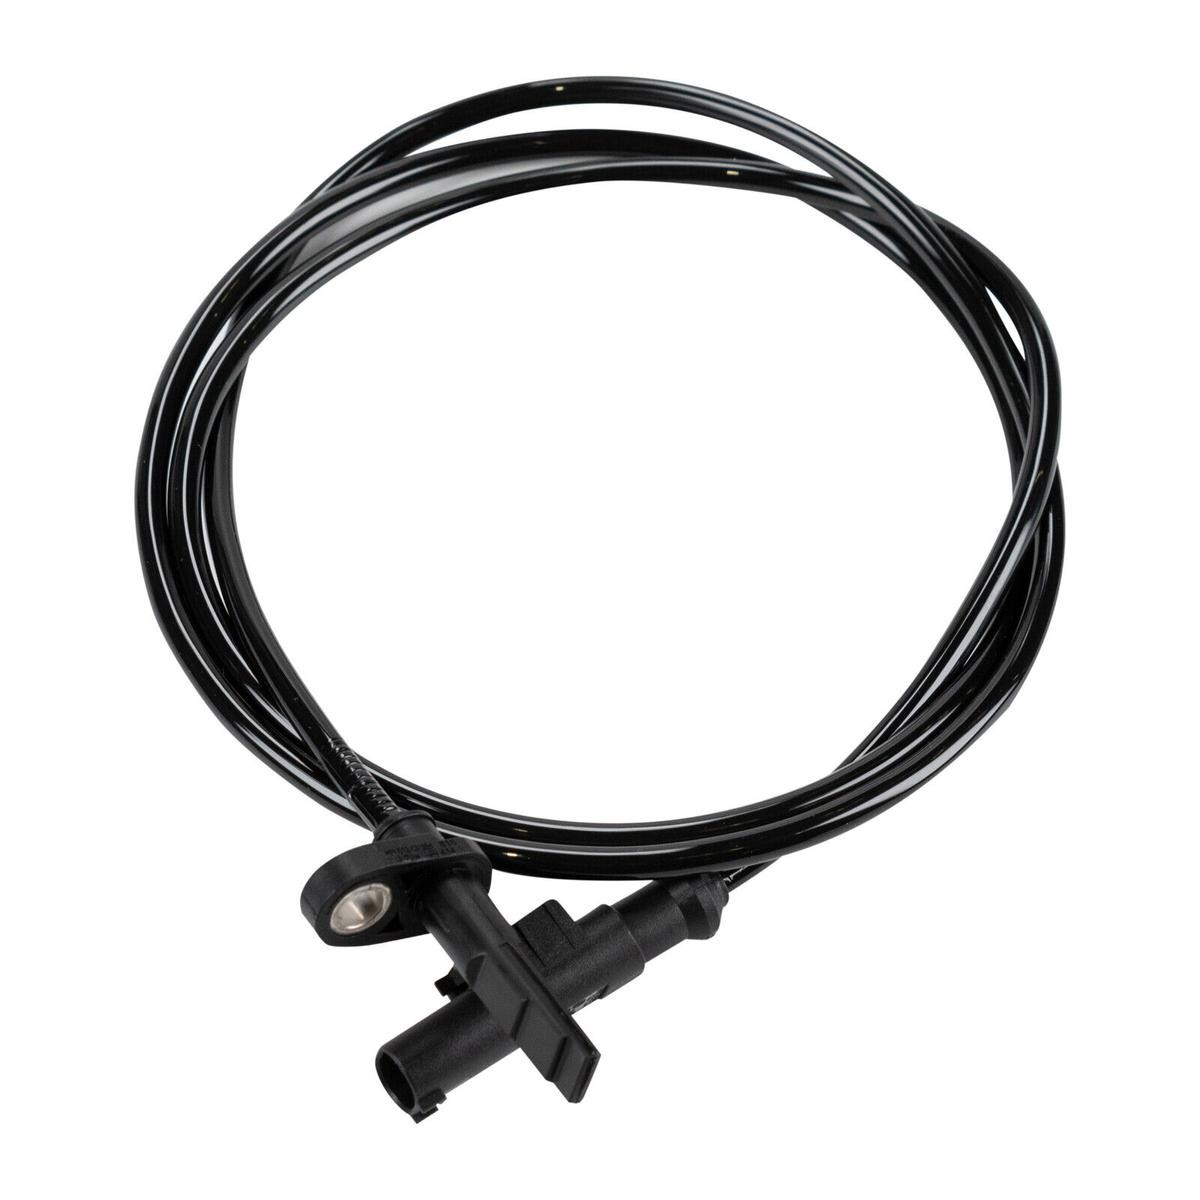 IVECO 5801279030 ABS sensor Front axle both sides, Active sensor, 2-pin connector, 1250mm, oval